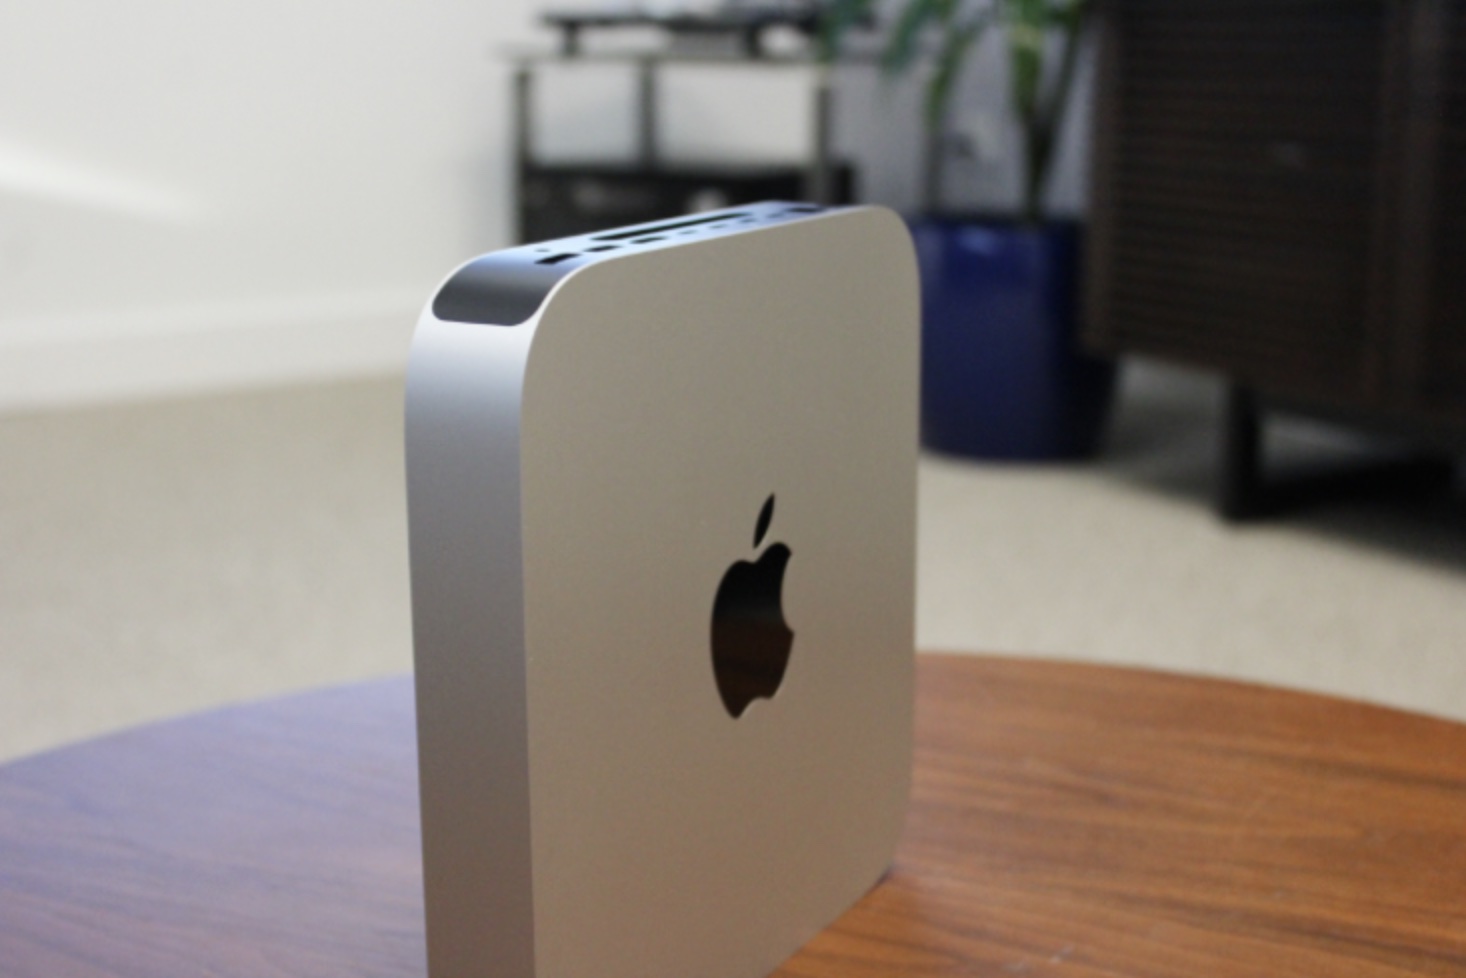 Apple Mac Mini M2 / M2 Pro Reviews, Pros and Cons